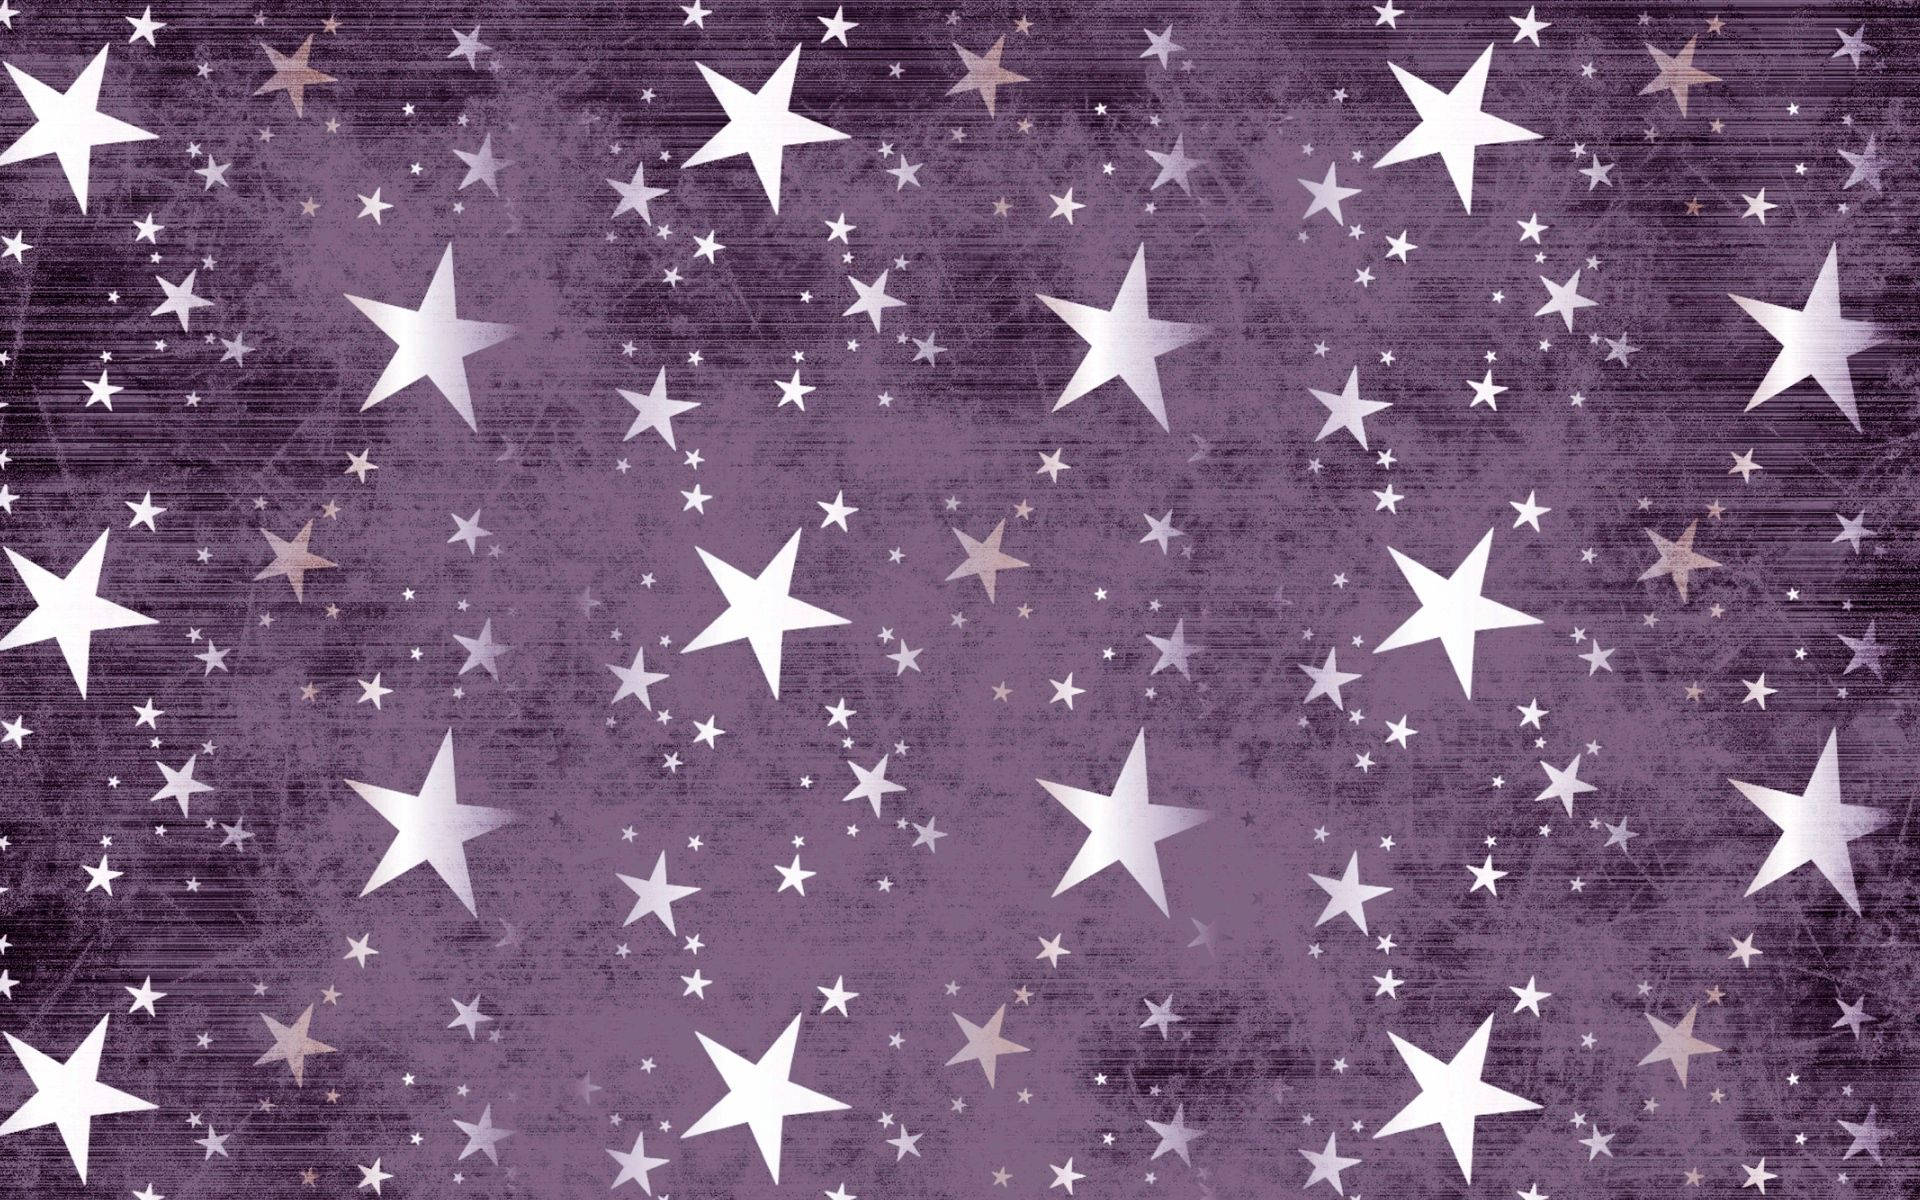 Brightly Colored Stars in a Textured Design Wallpaper